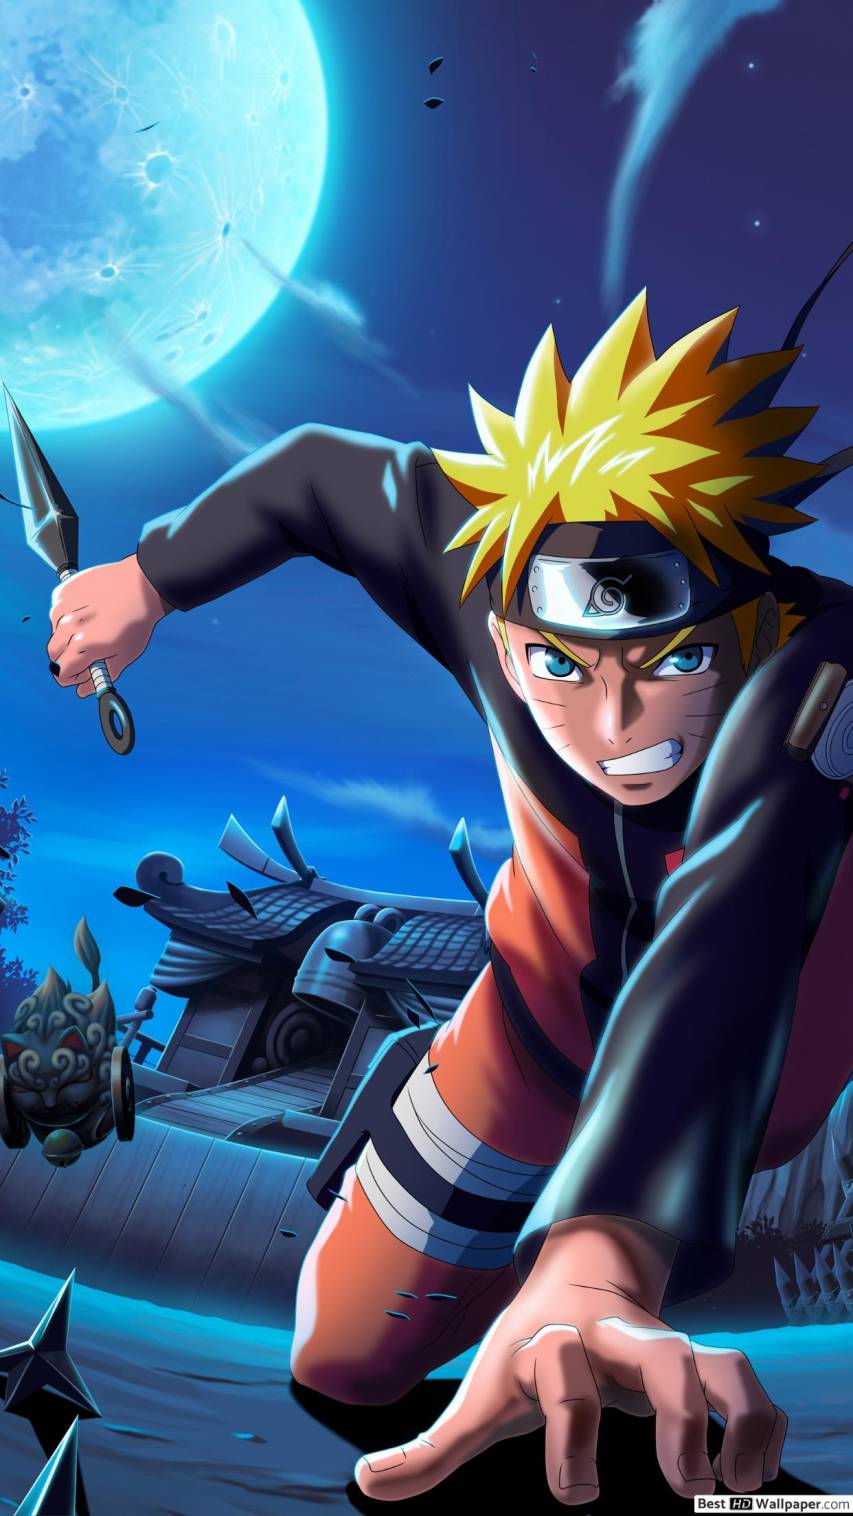 Naruto IPhone Wallpapers and Backgrounds image Free Download